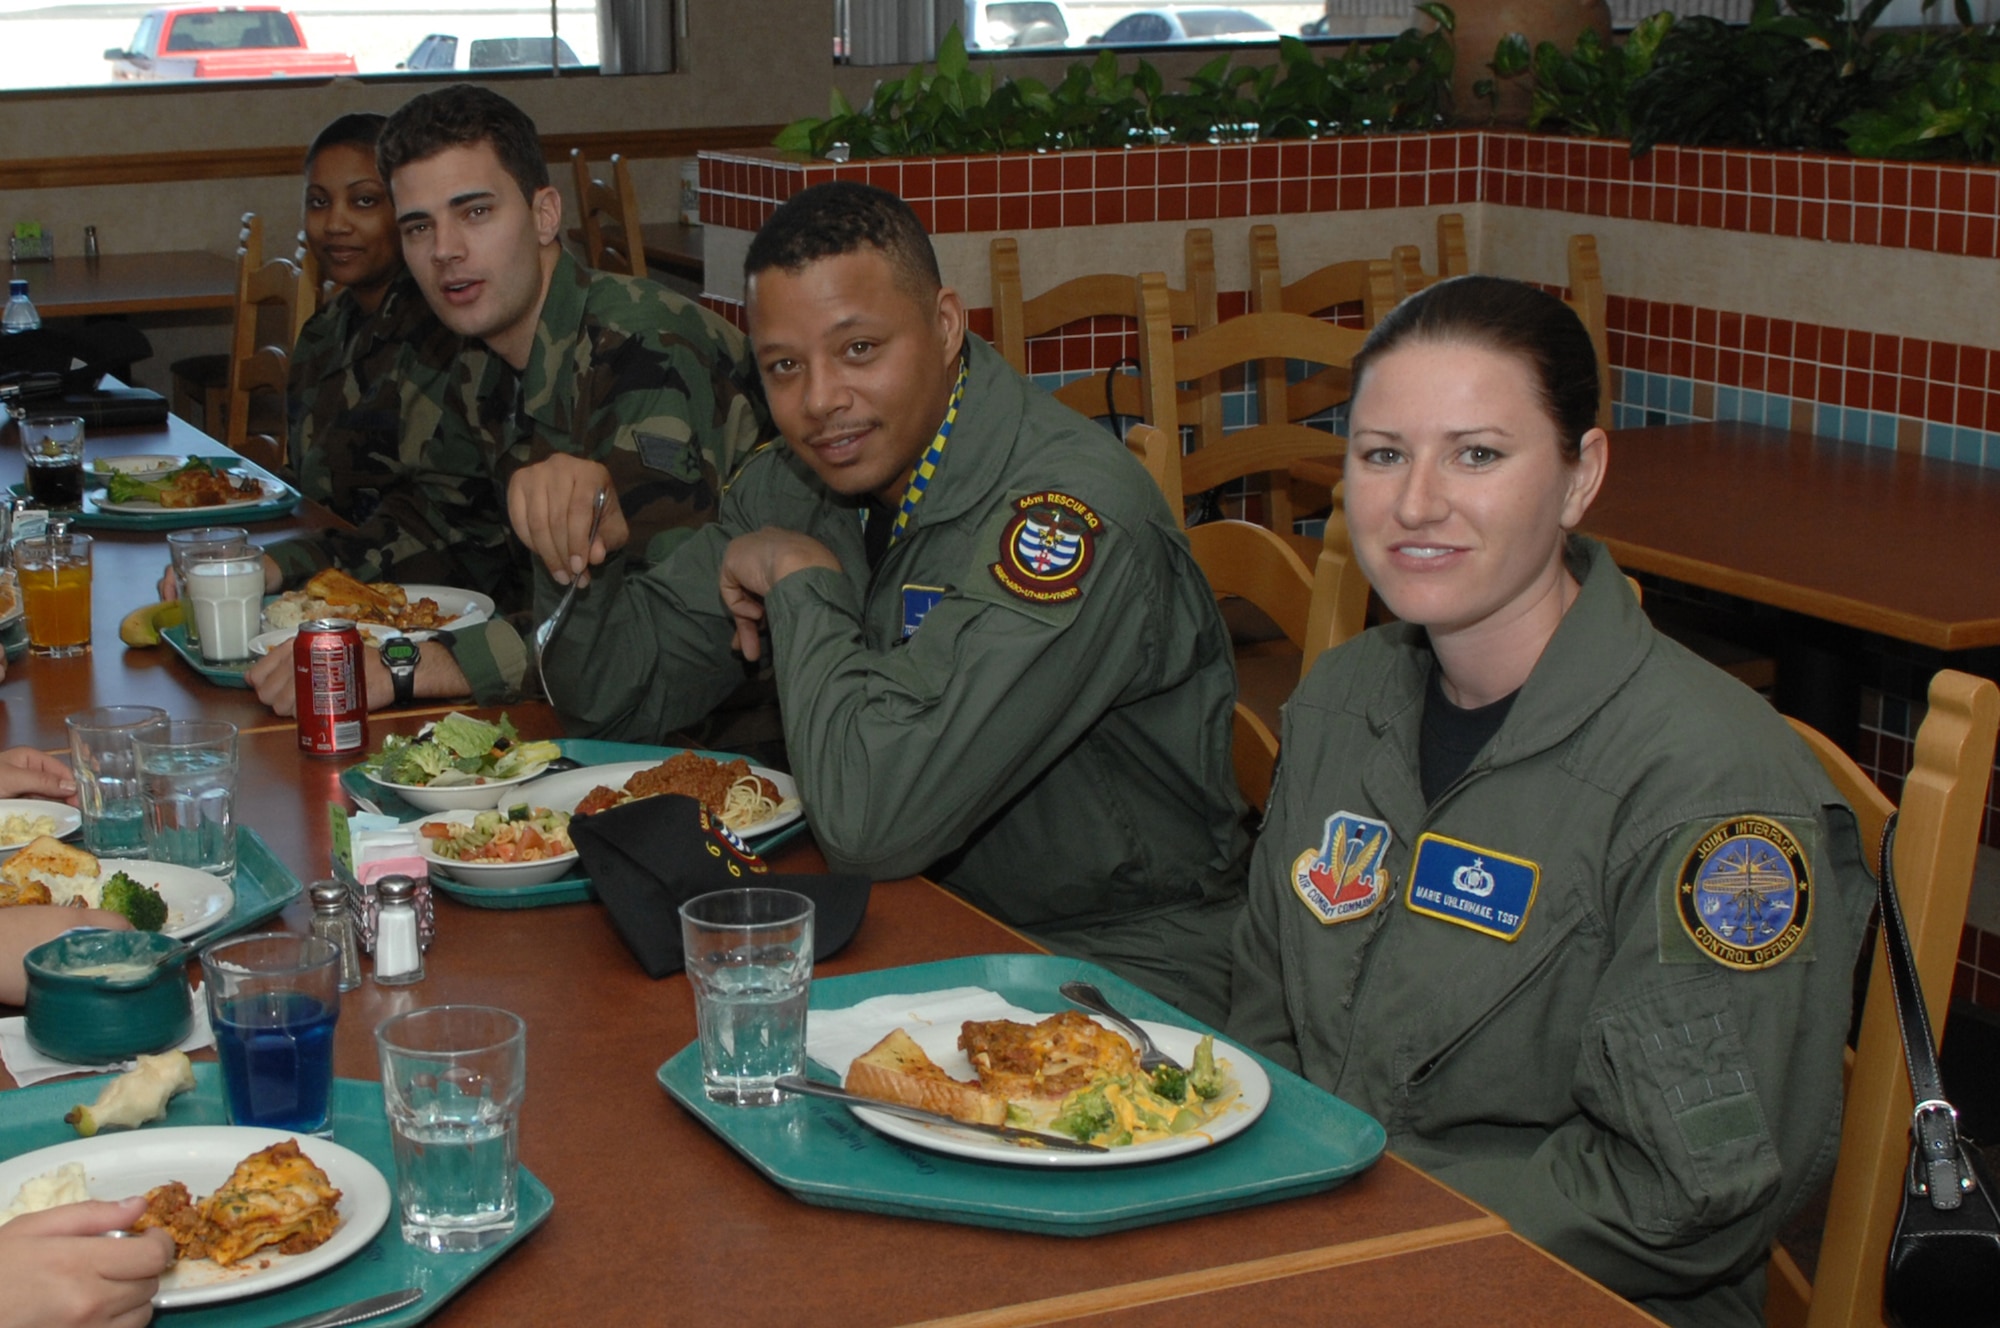 Oscar-nominated actor Terrence Howard has lunch with  Airmen at the Crosswinds Dining Facility " at Nellis Air Force Base, Nev. on March 16. Mr. Howard will be starring in  “Iron Man,” which begins filming soon. The U.S. Air Force will be depicted in a number of scenes in the film.  (U.S. Air Force photo by Tech. Sgt. Scottie McCord)